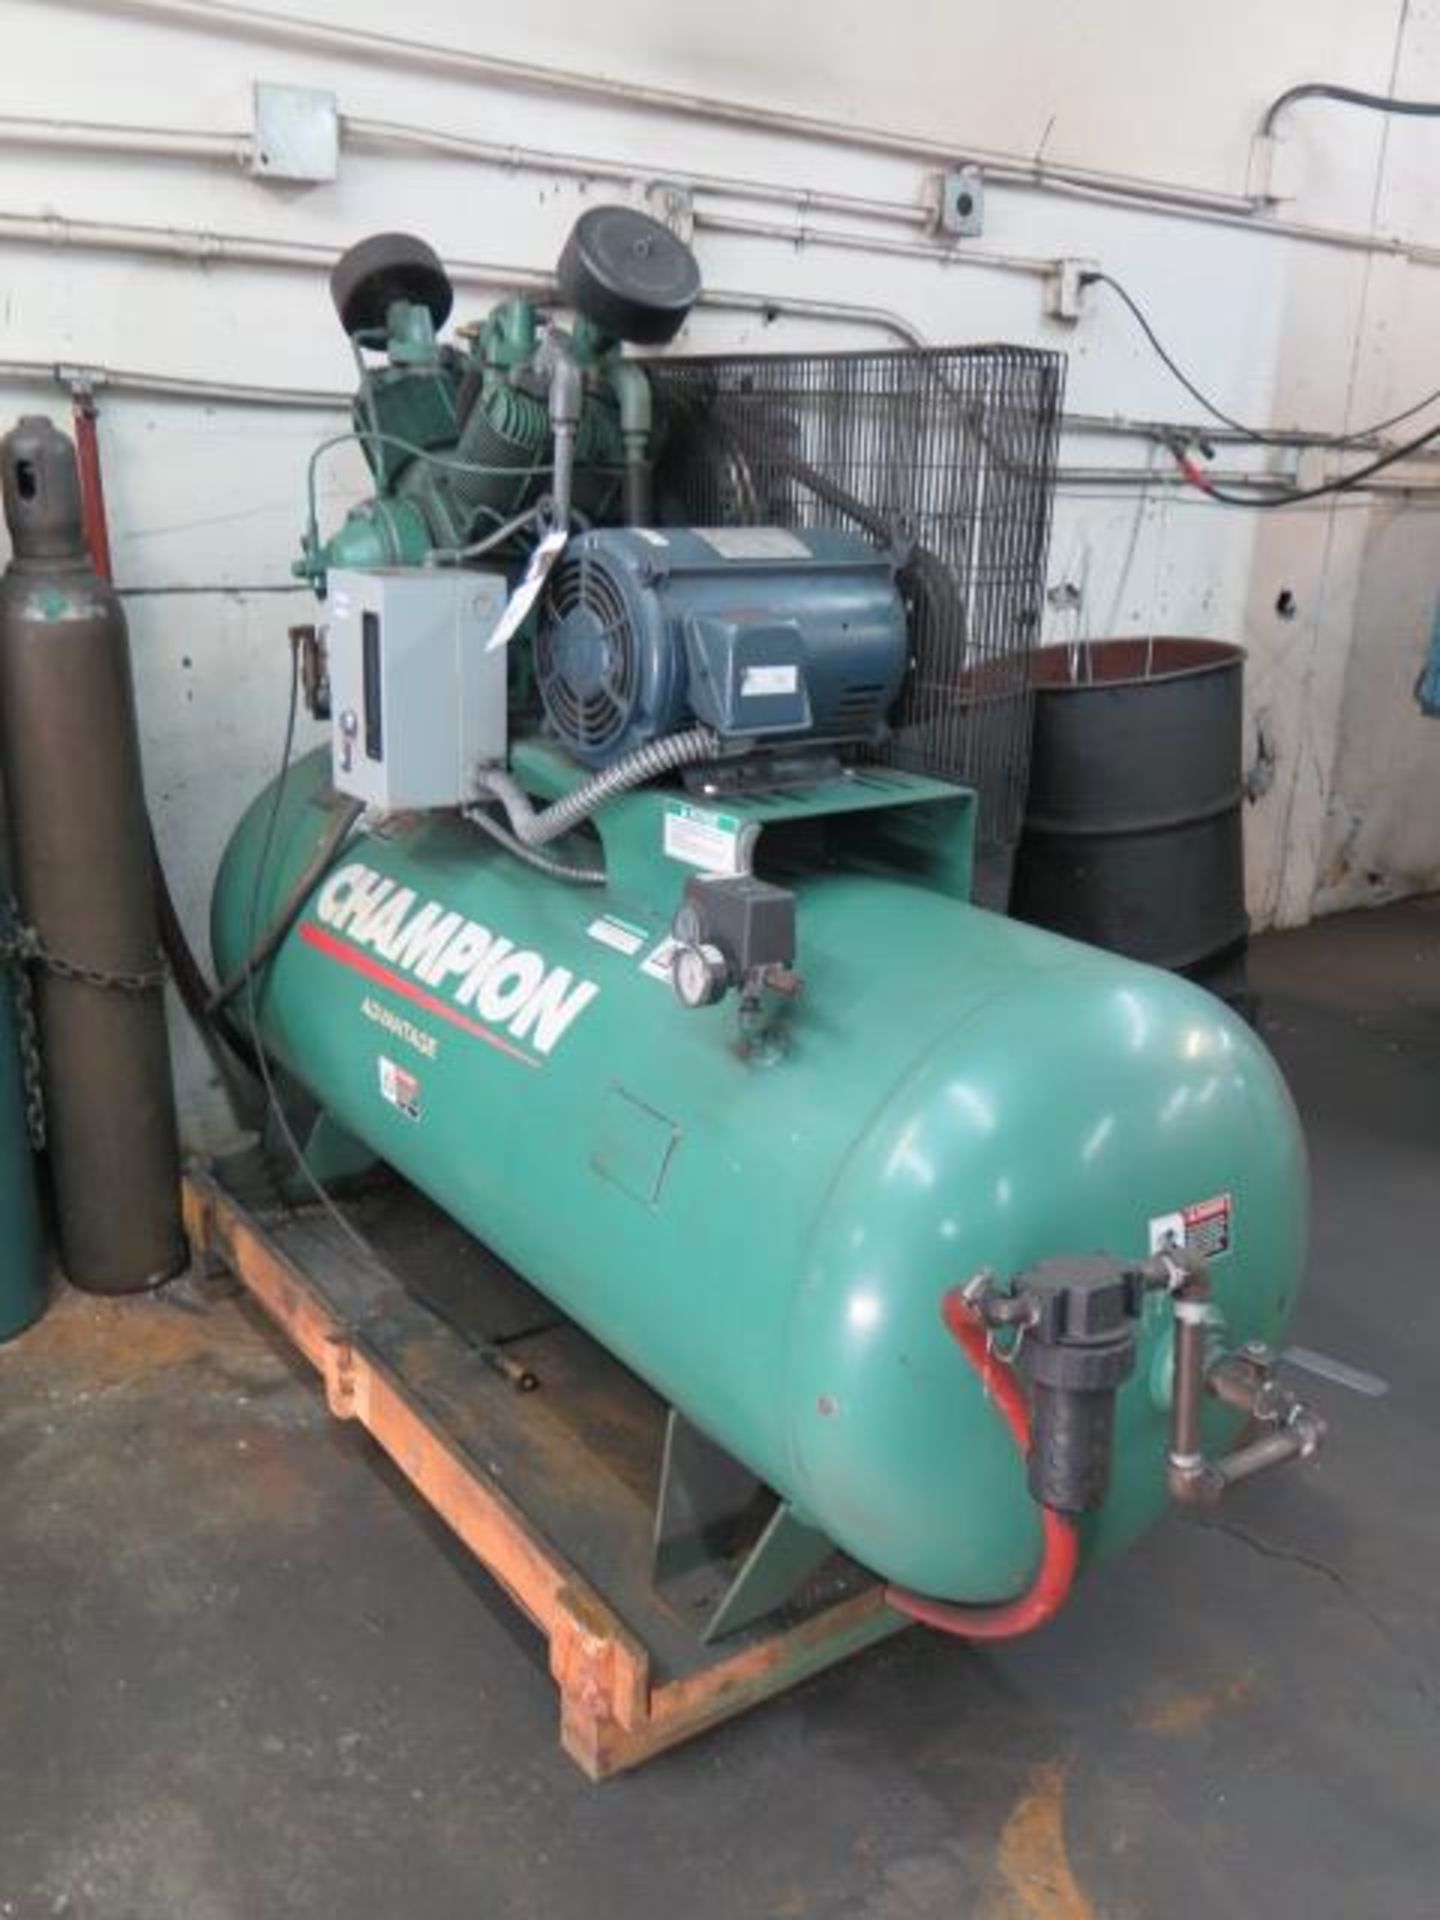 2017 Champion Advantage 7.5Hp Horizontal Air Compressor w/ 2-Stage Pump, 120 Gallon Tank (SOLD AS-IS - Image 2 of 12